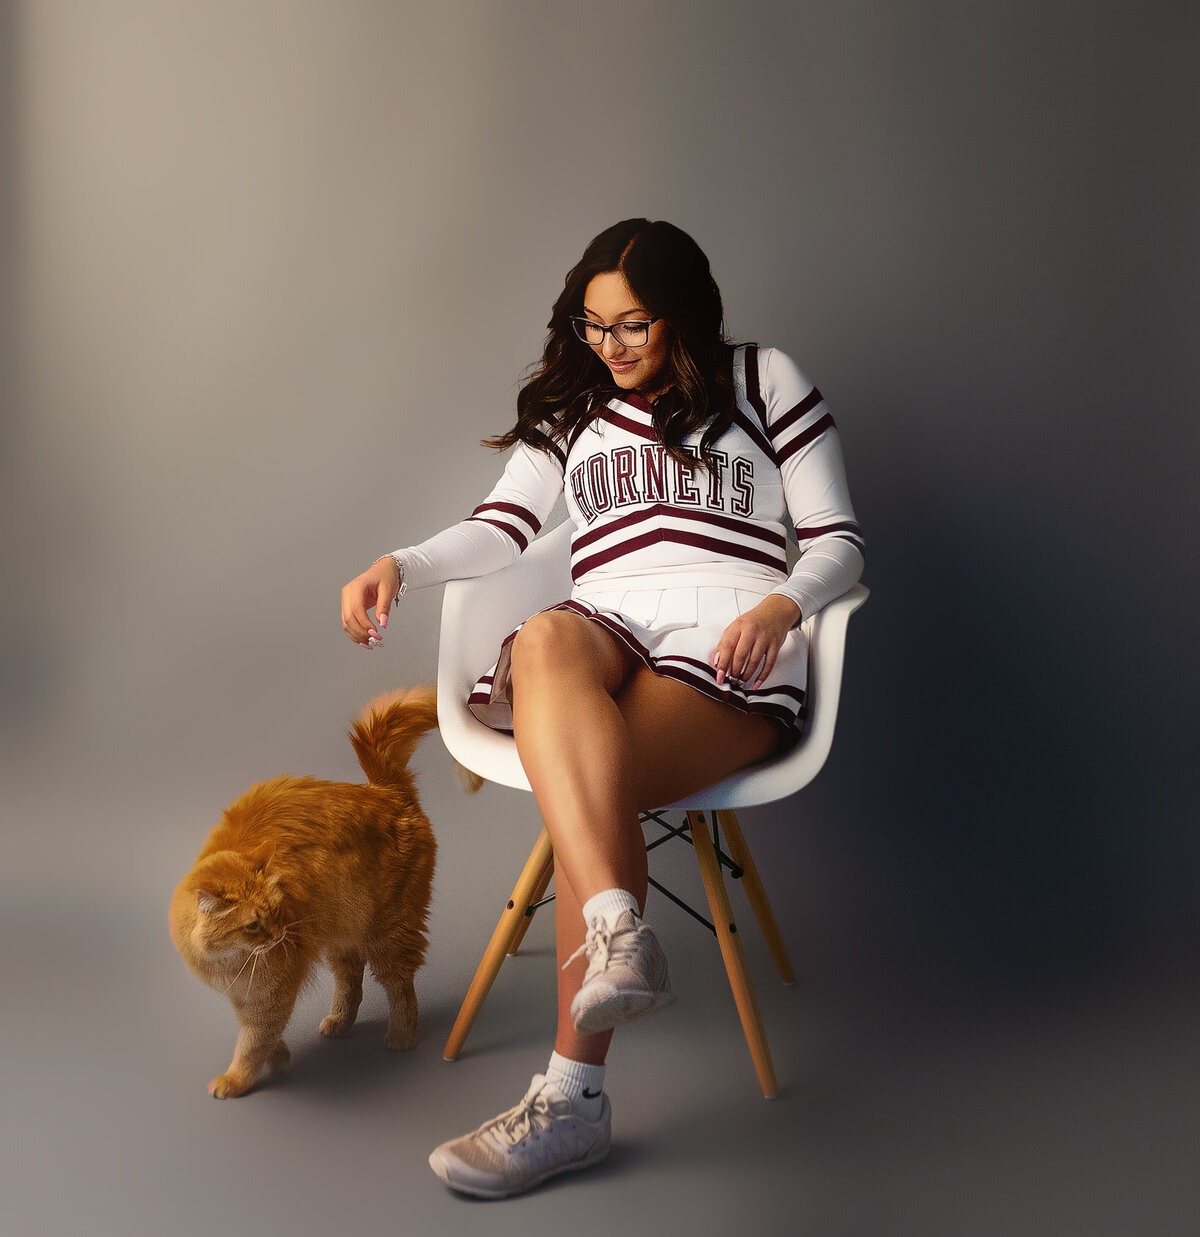 high school cheerleader in studio session with a cat